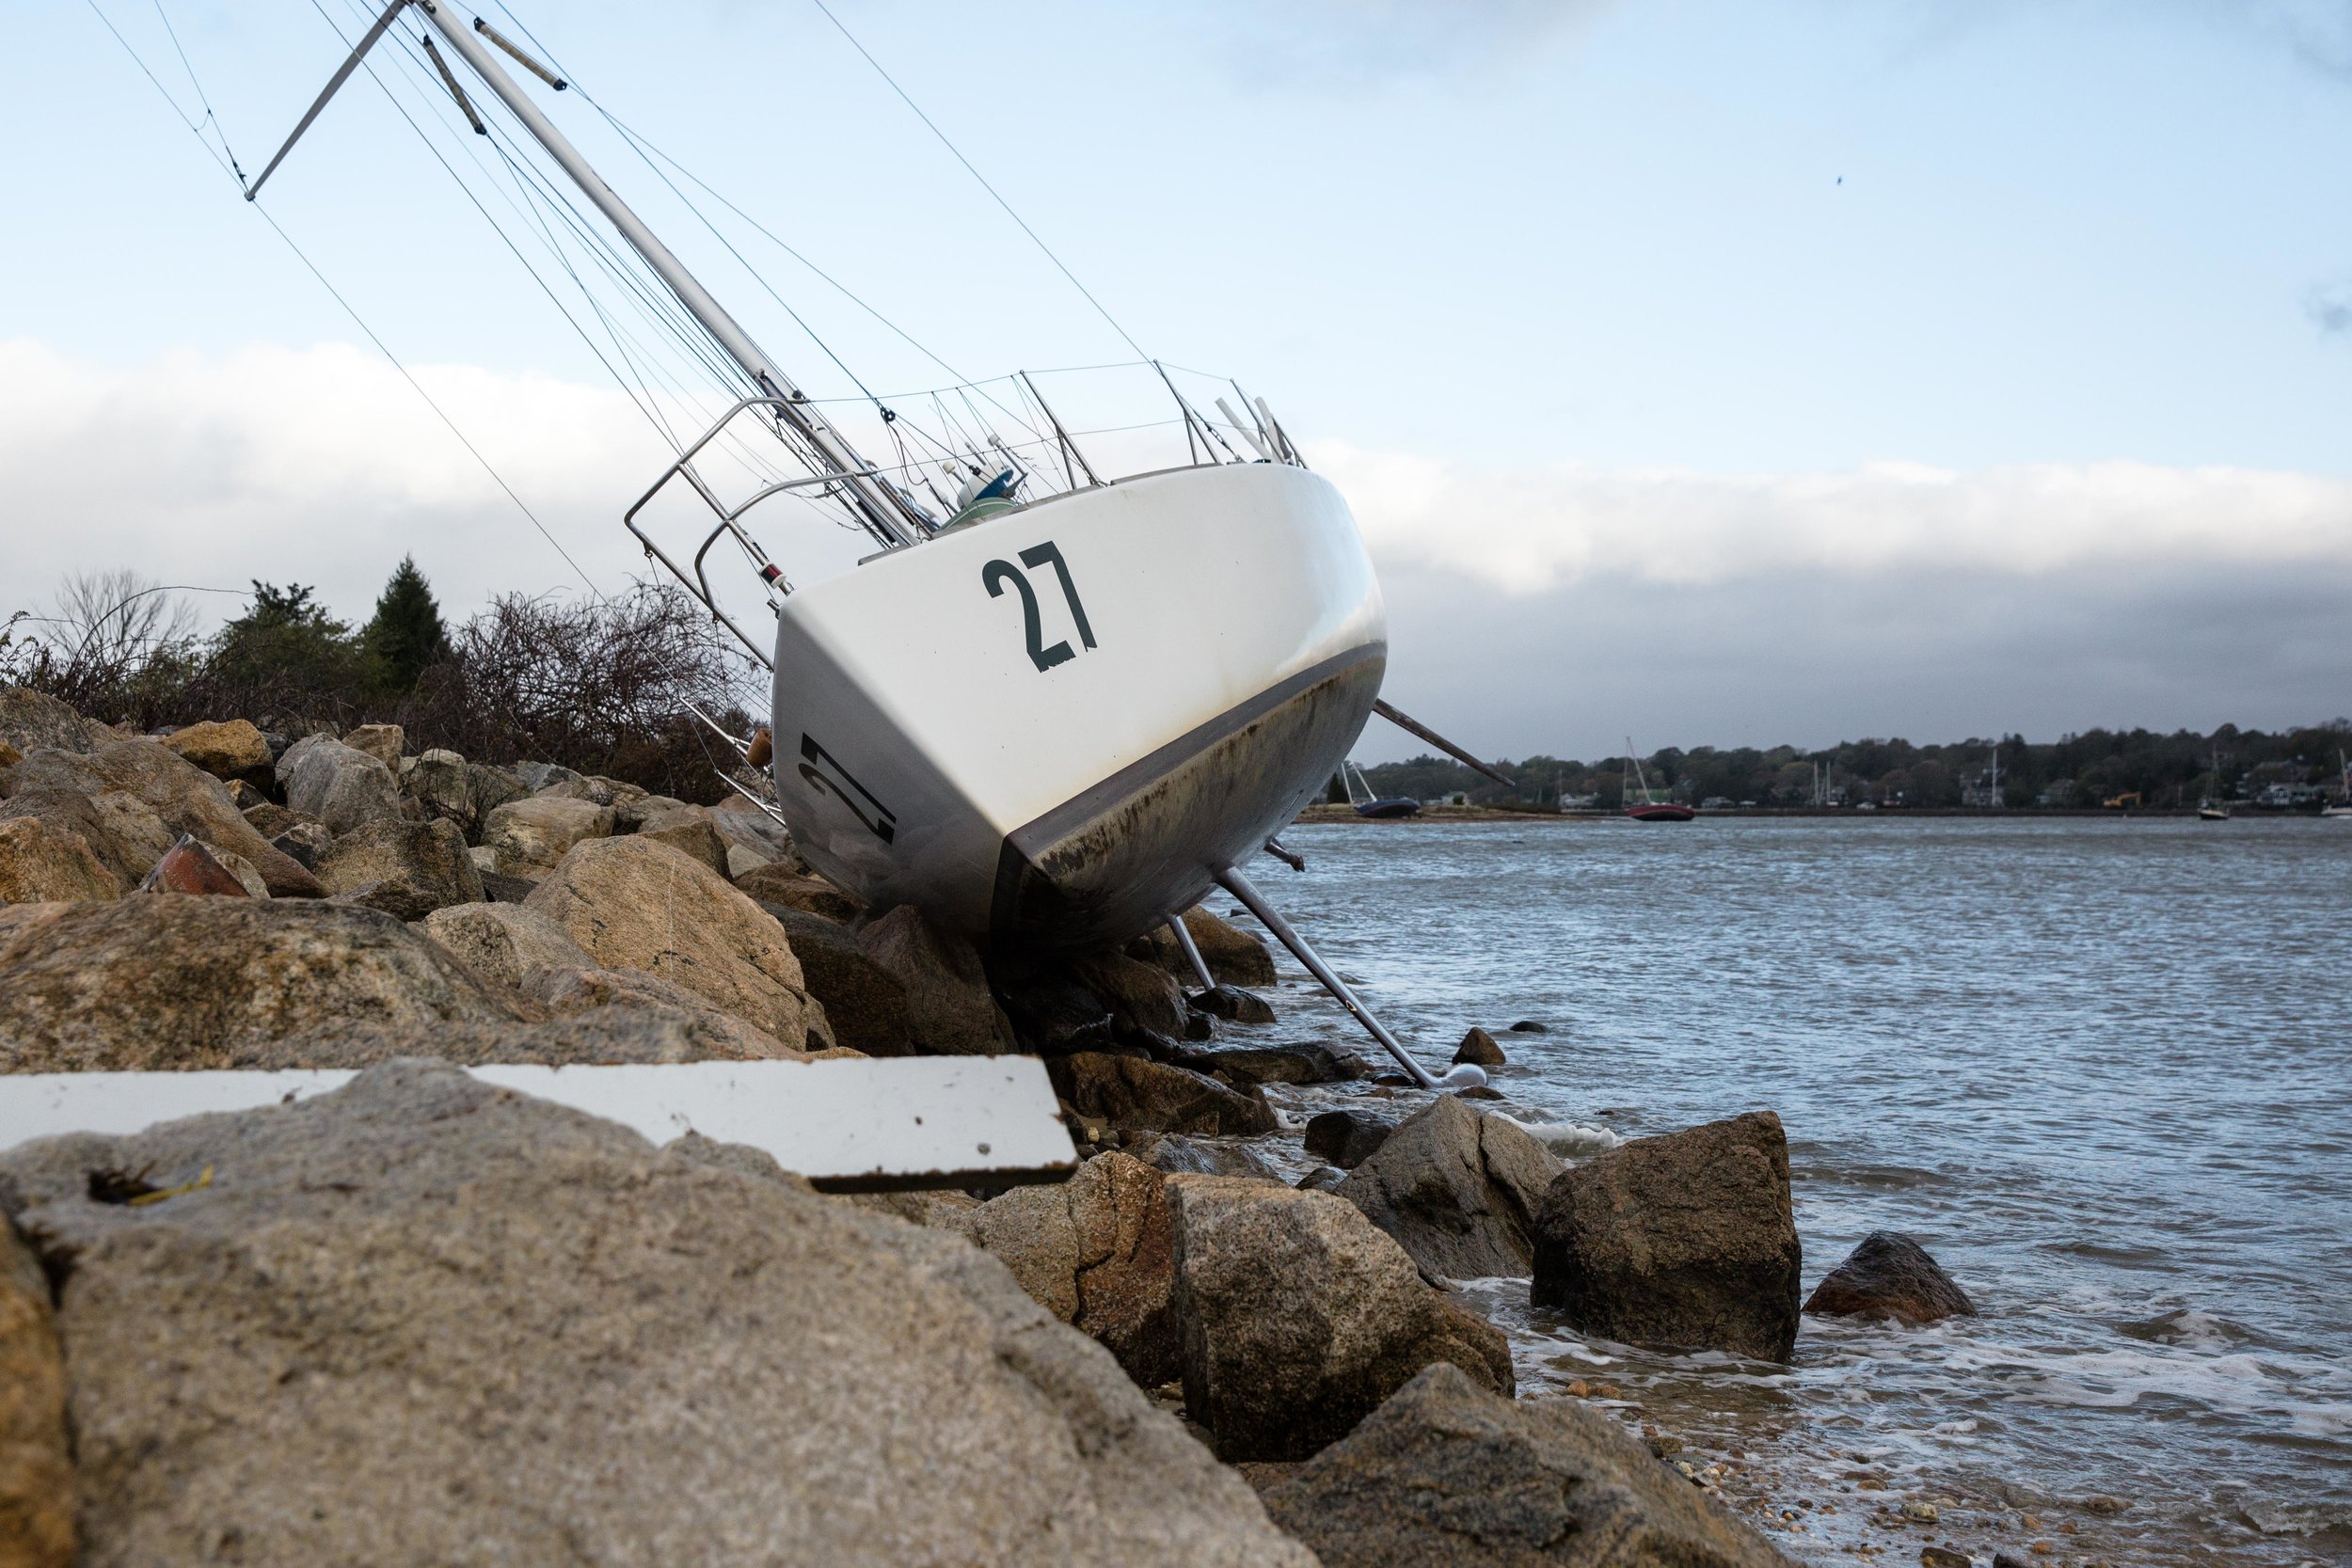  A sailboat rests on the rocks near Smithneck Road. 